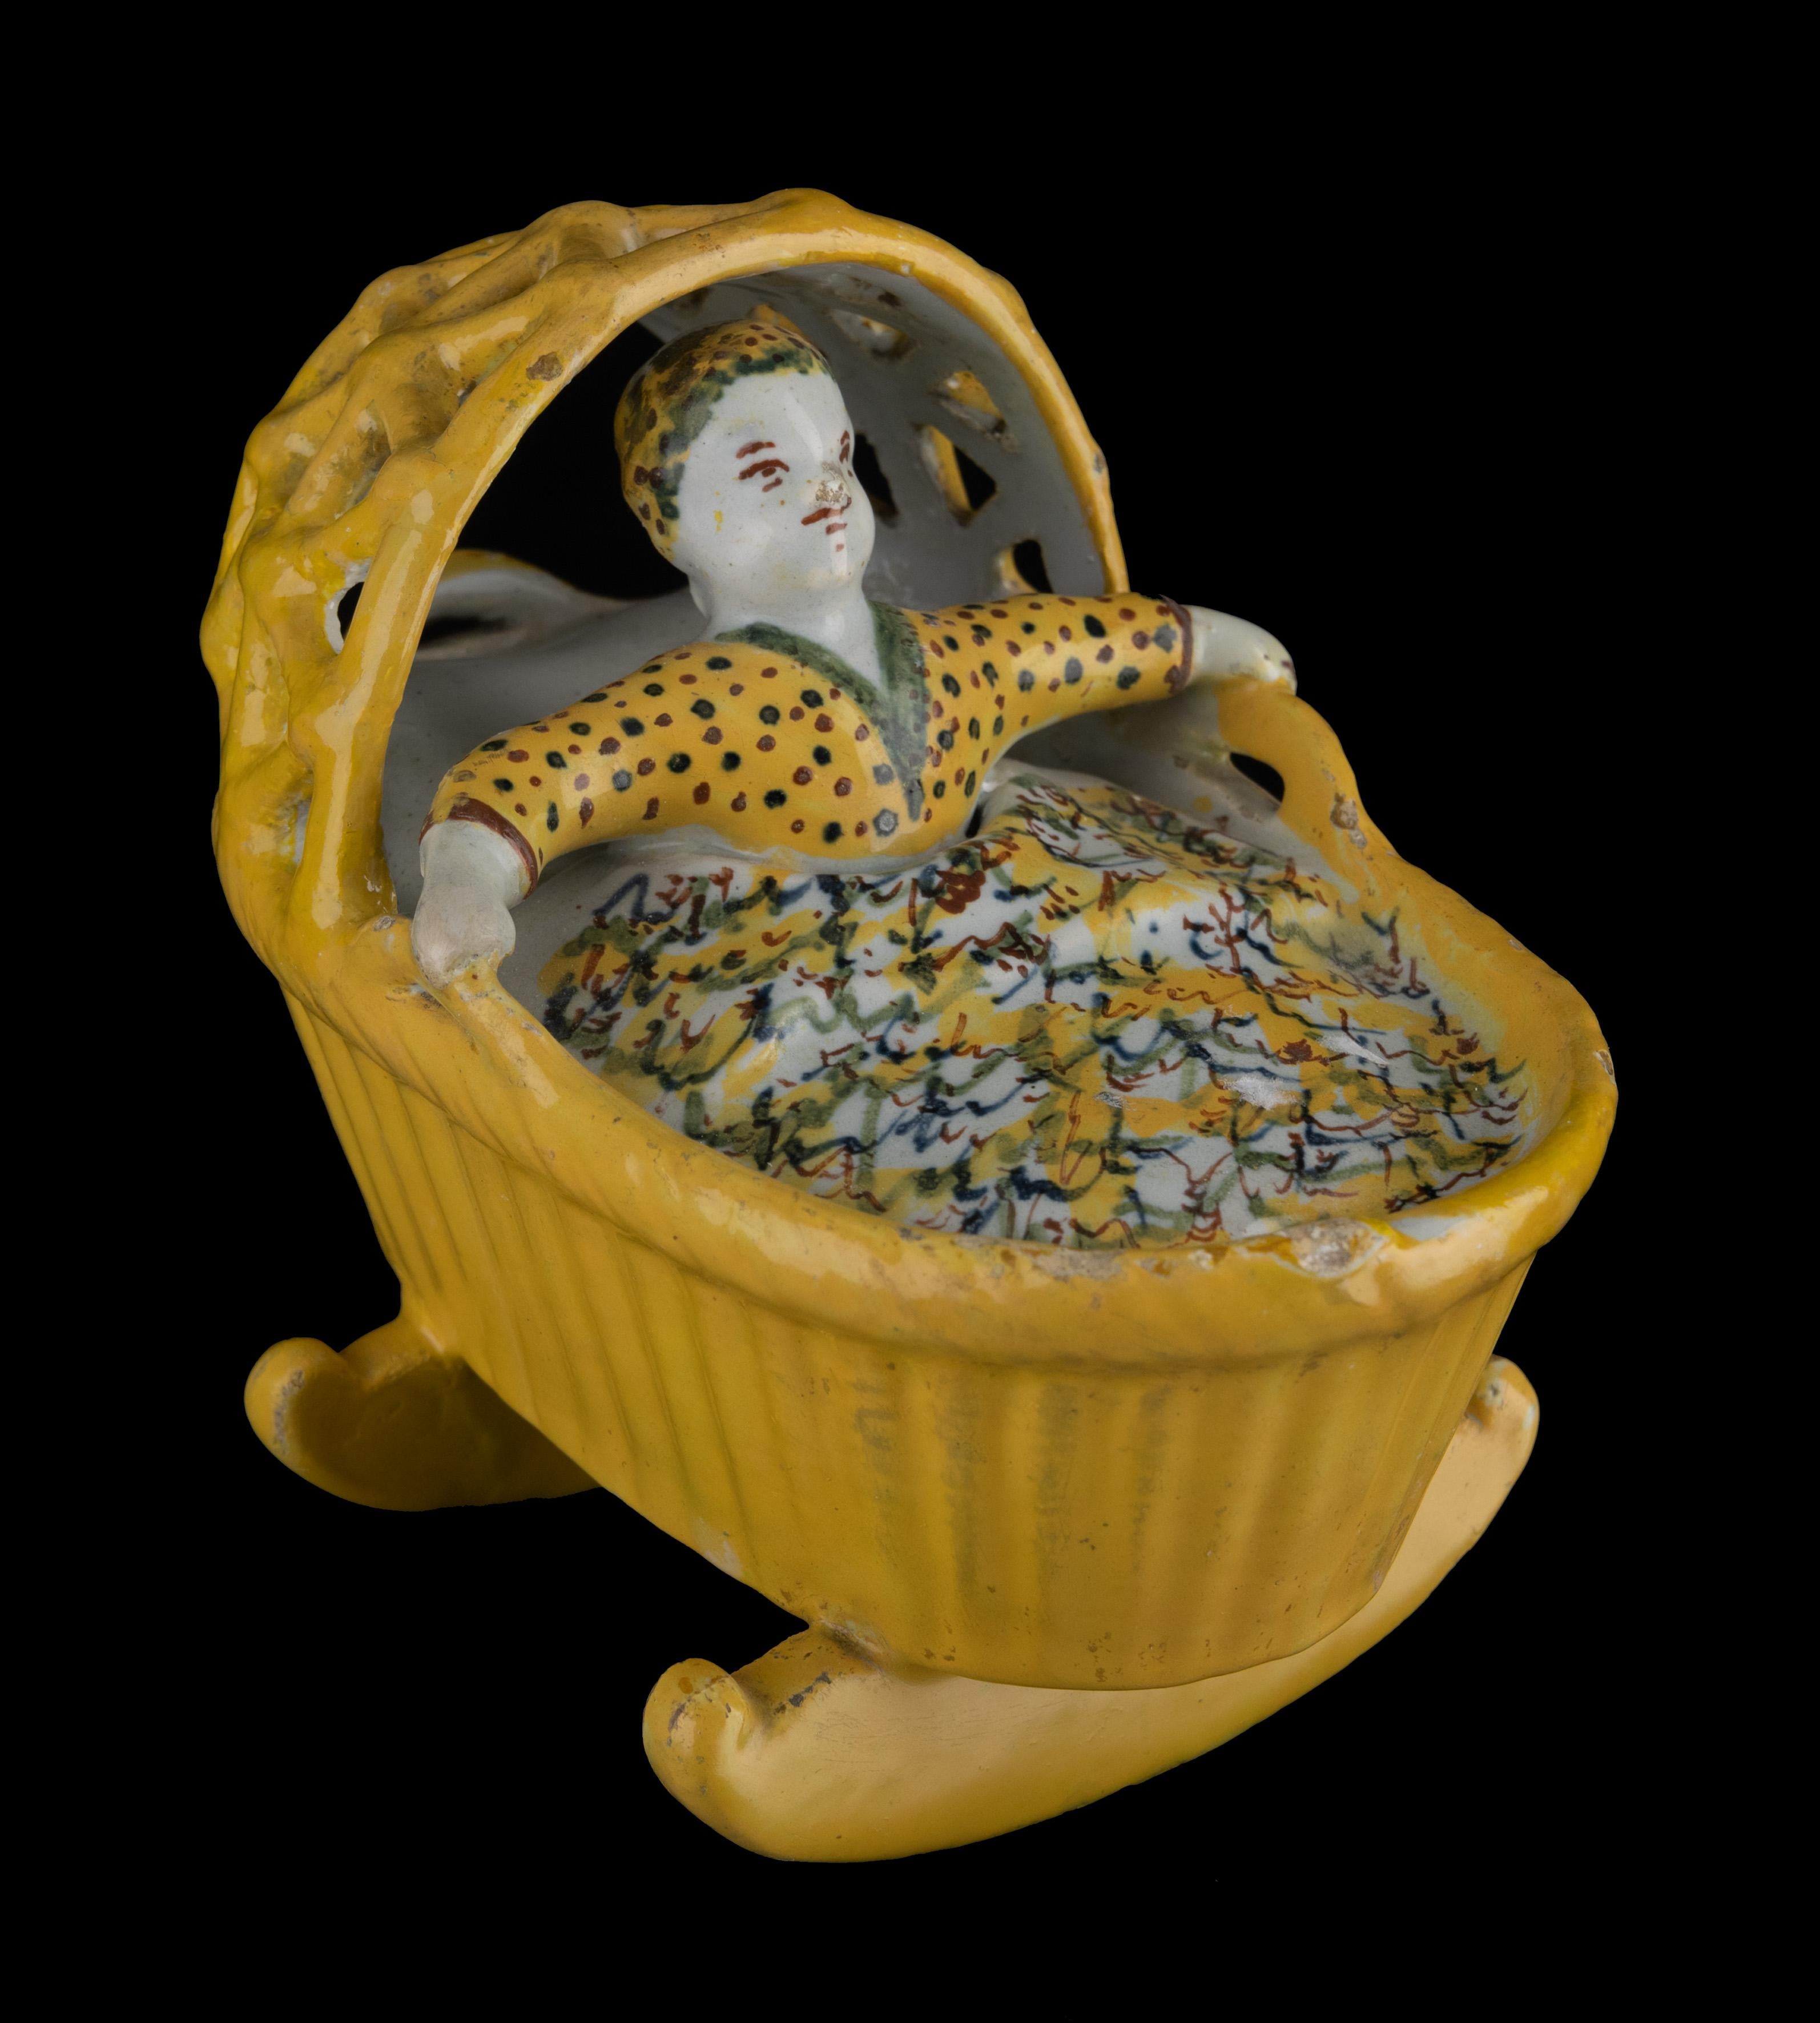 Rocking cradle with child. Delft, 1750-1780

Polychrome figure of a child in a rocking cradle with open hood. The child is dressed in a yellow nightgown and sleeping cap with reddish-brown and green dots. It sits upright under a marbled blanket